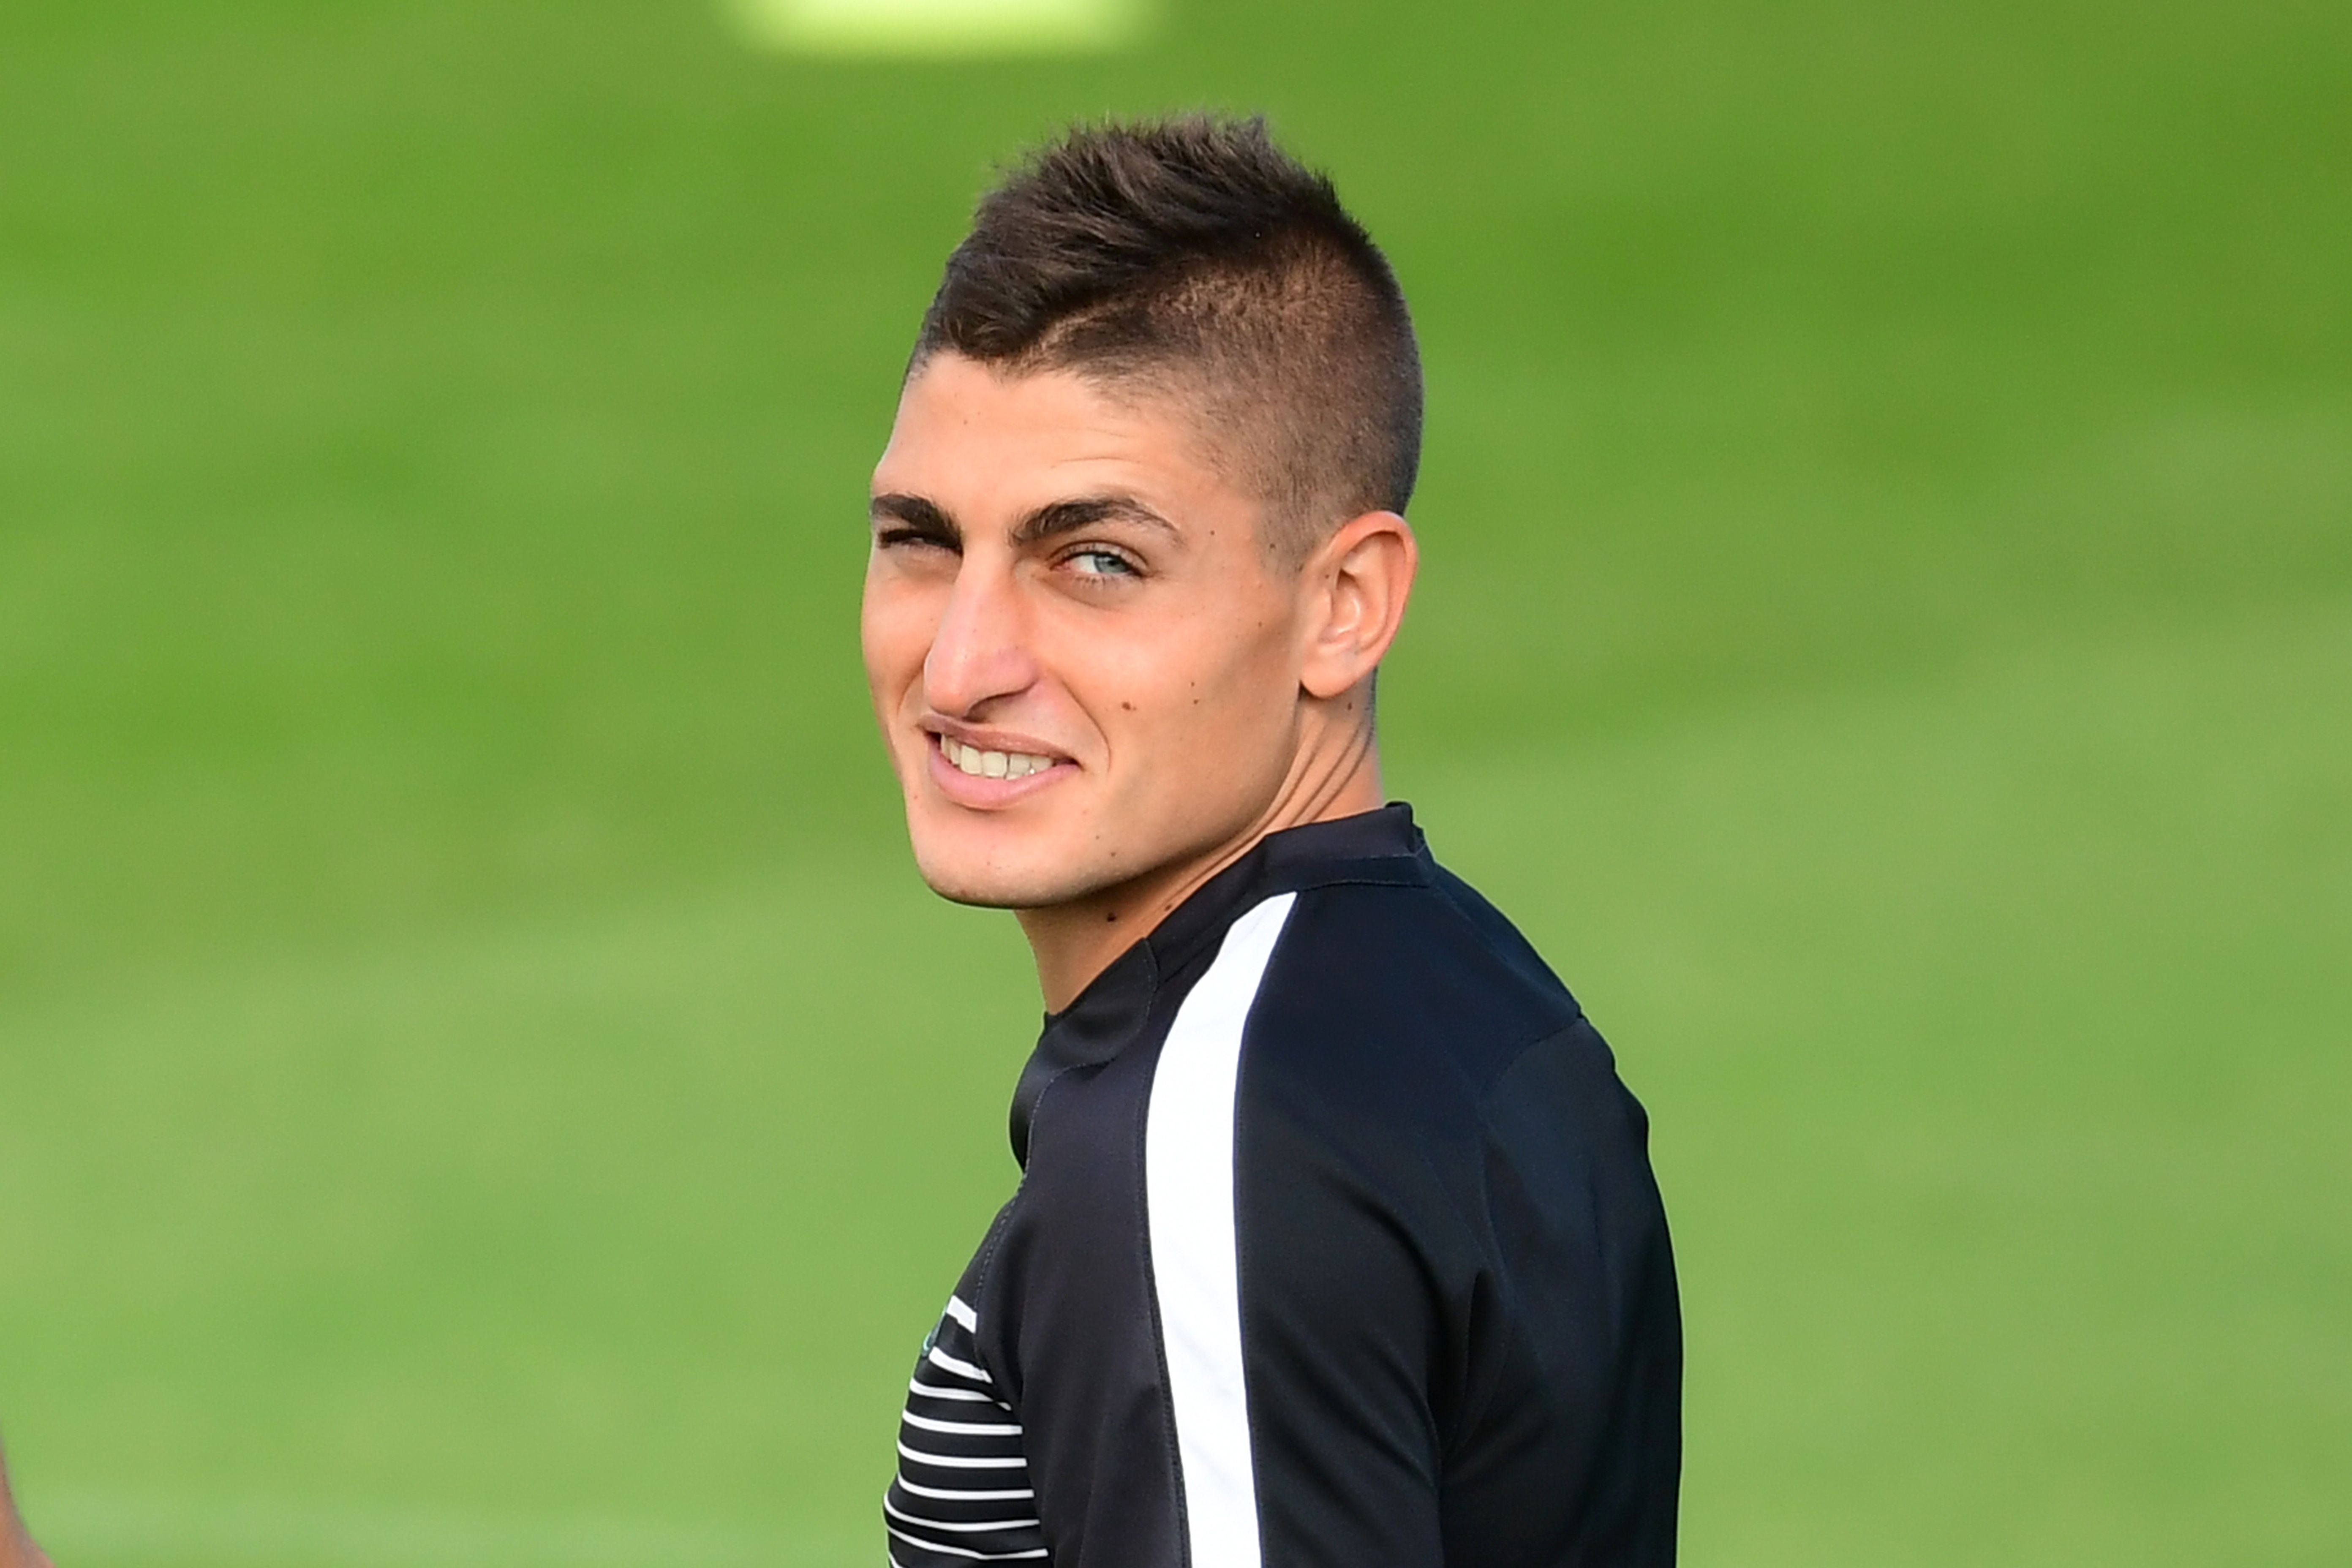 Paris Saint-Germain's midfielder Marco Verratti takes part in a training session on the eve of the UEFA Champions League football match  Paris-Saint Germain vs Arsenal, on September 12, 2016 at the Ooredoo training centre in Saint-Germain-en-Laye, outside Paris. / AFP / FRANCK FIFE        (Photo credit should read FRANCK FIFE/AFP/Getty Images)